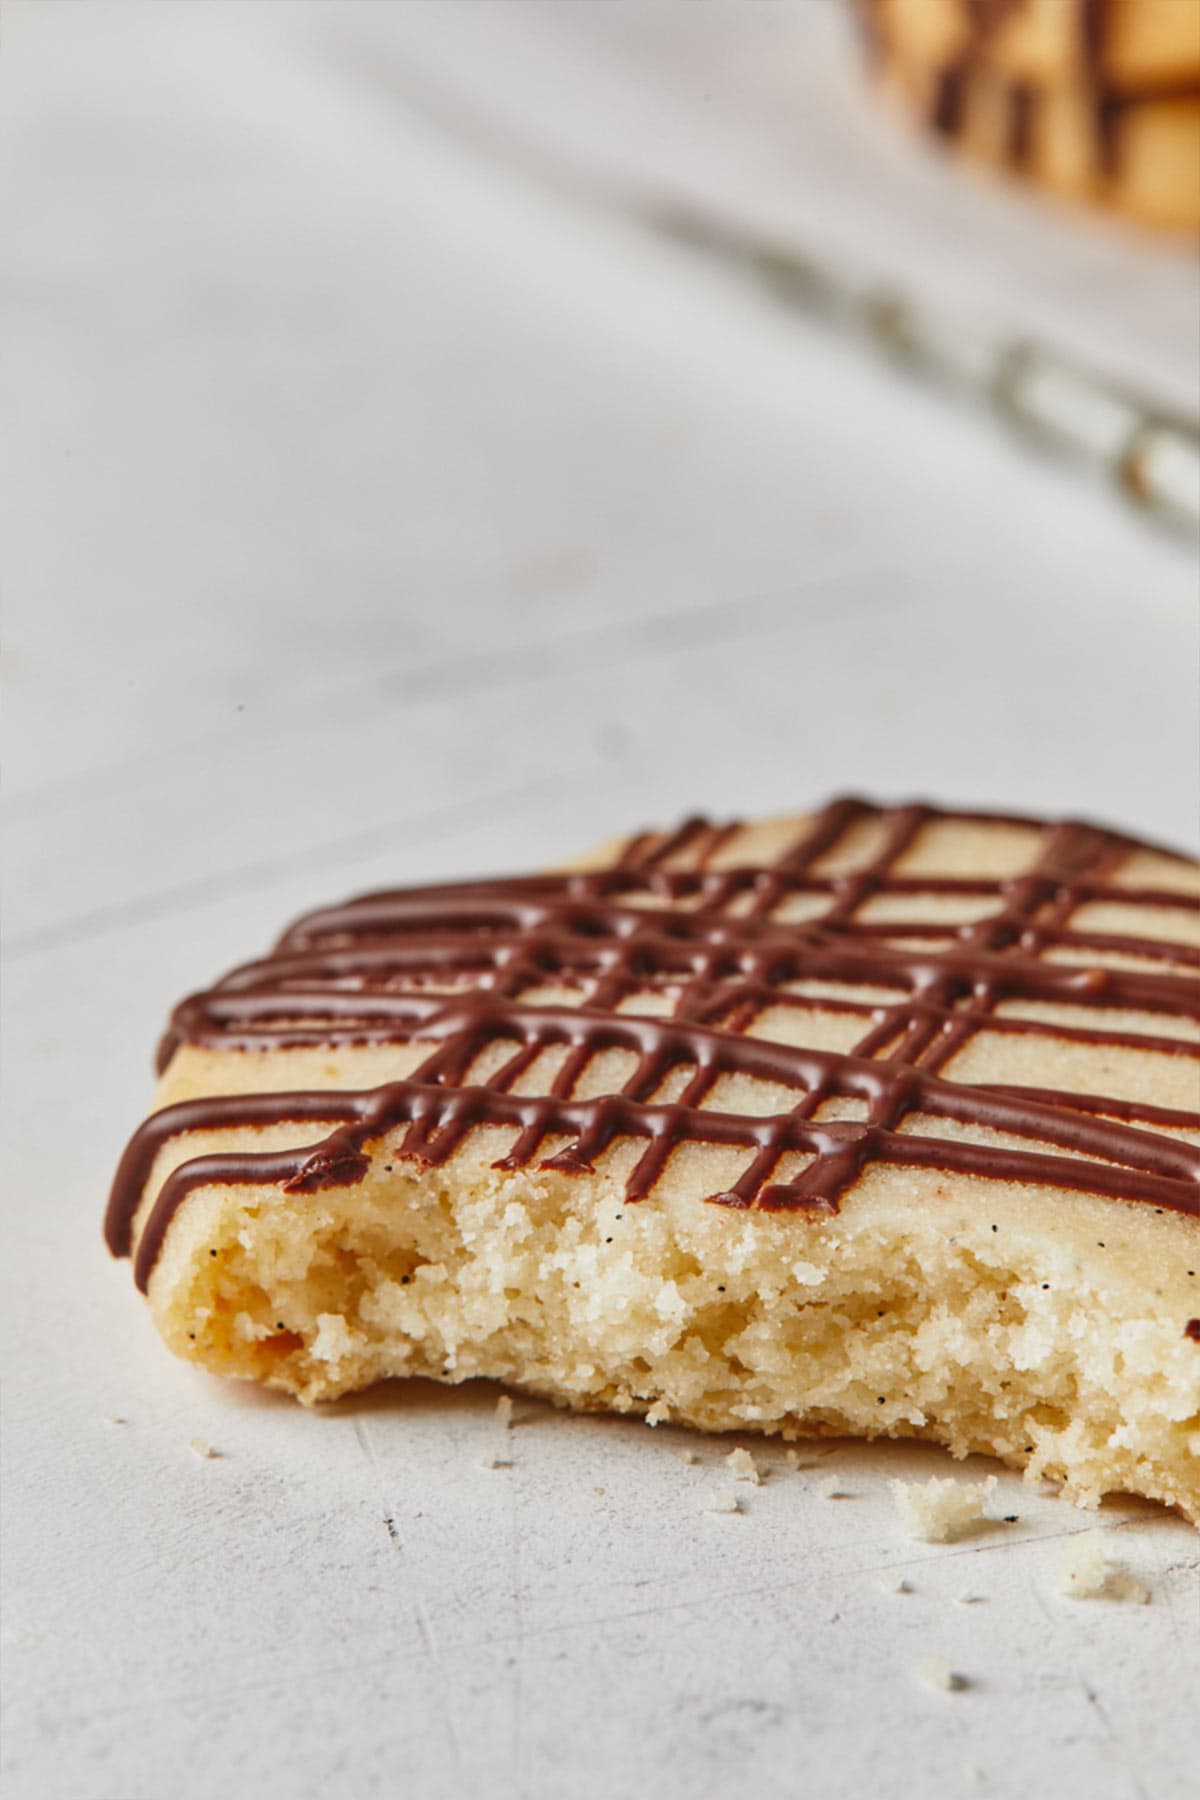 Close up shot of broken shortbread cookie with chocolate drizzle against white background.